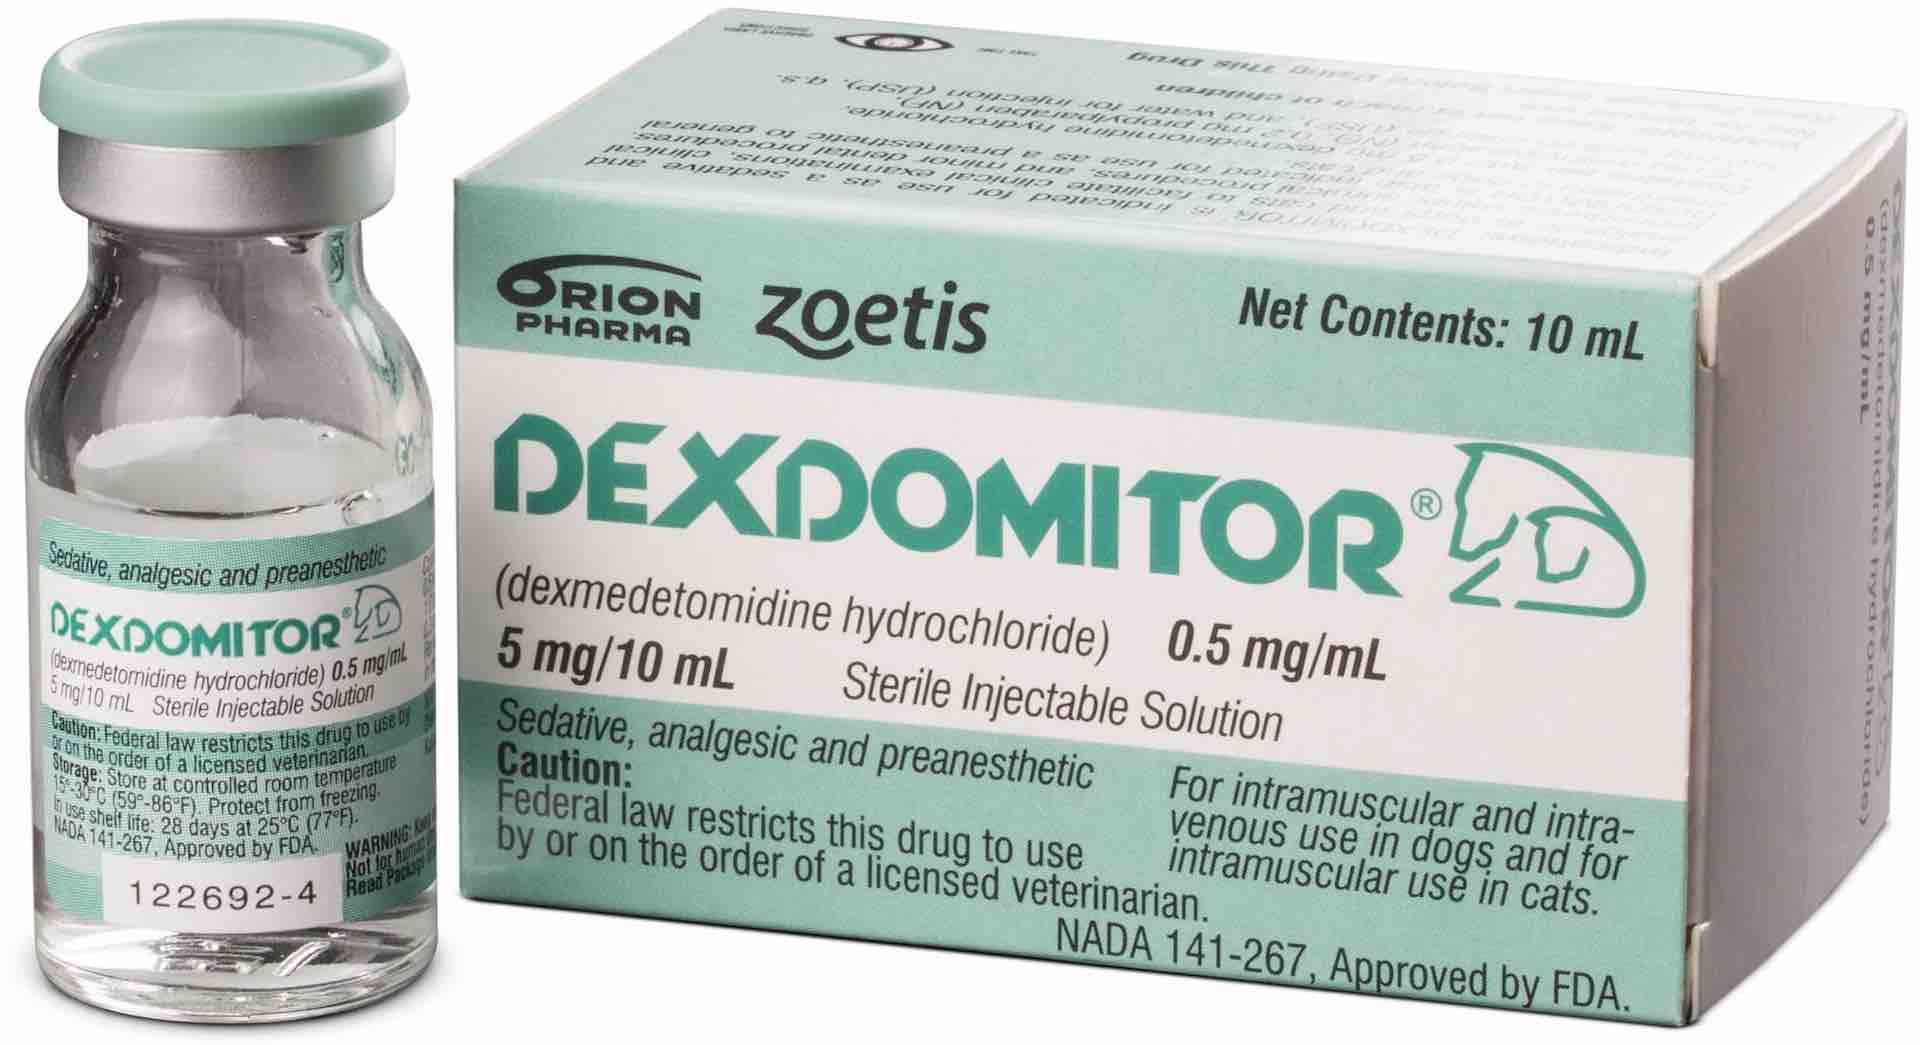 Dexdomitor 0.5 Injectable Solution